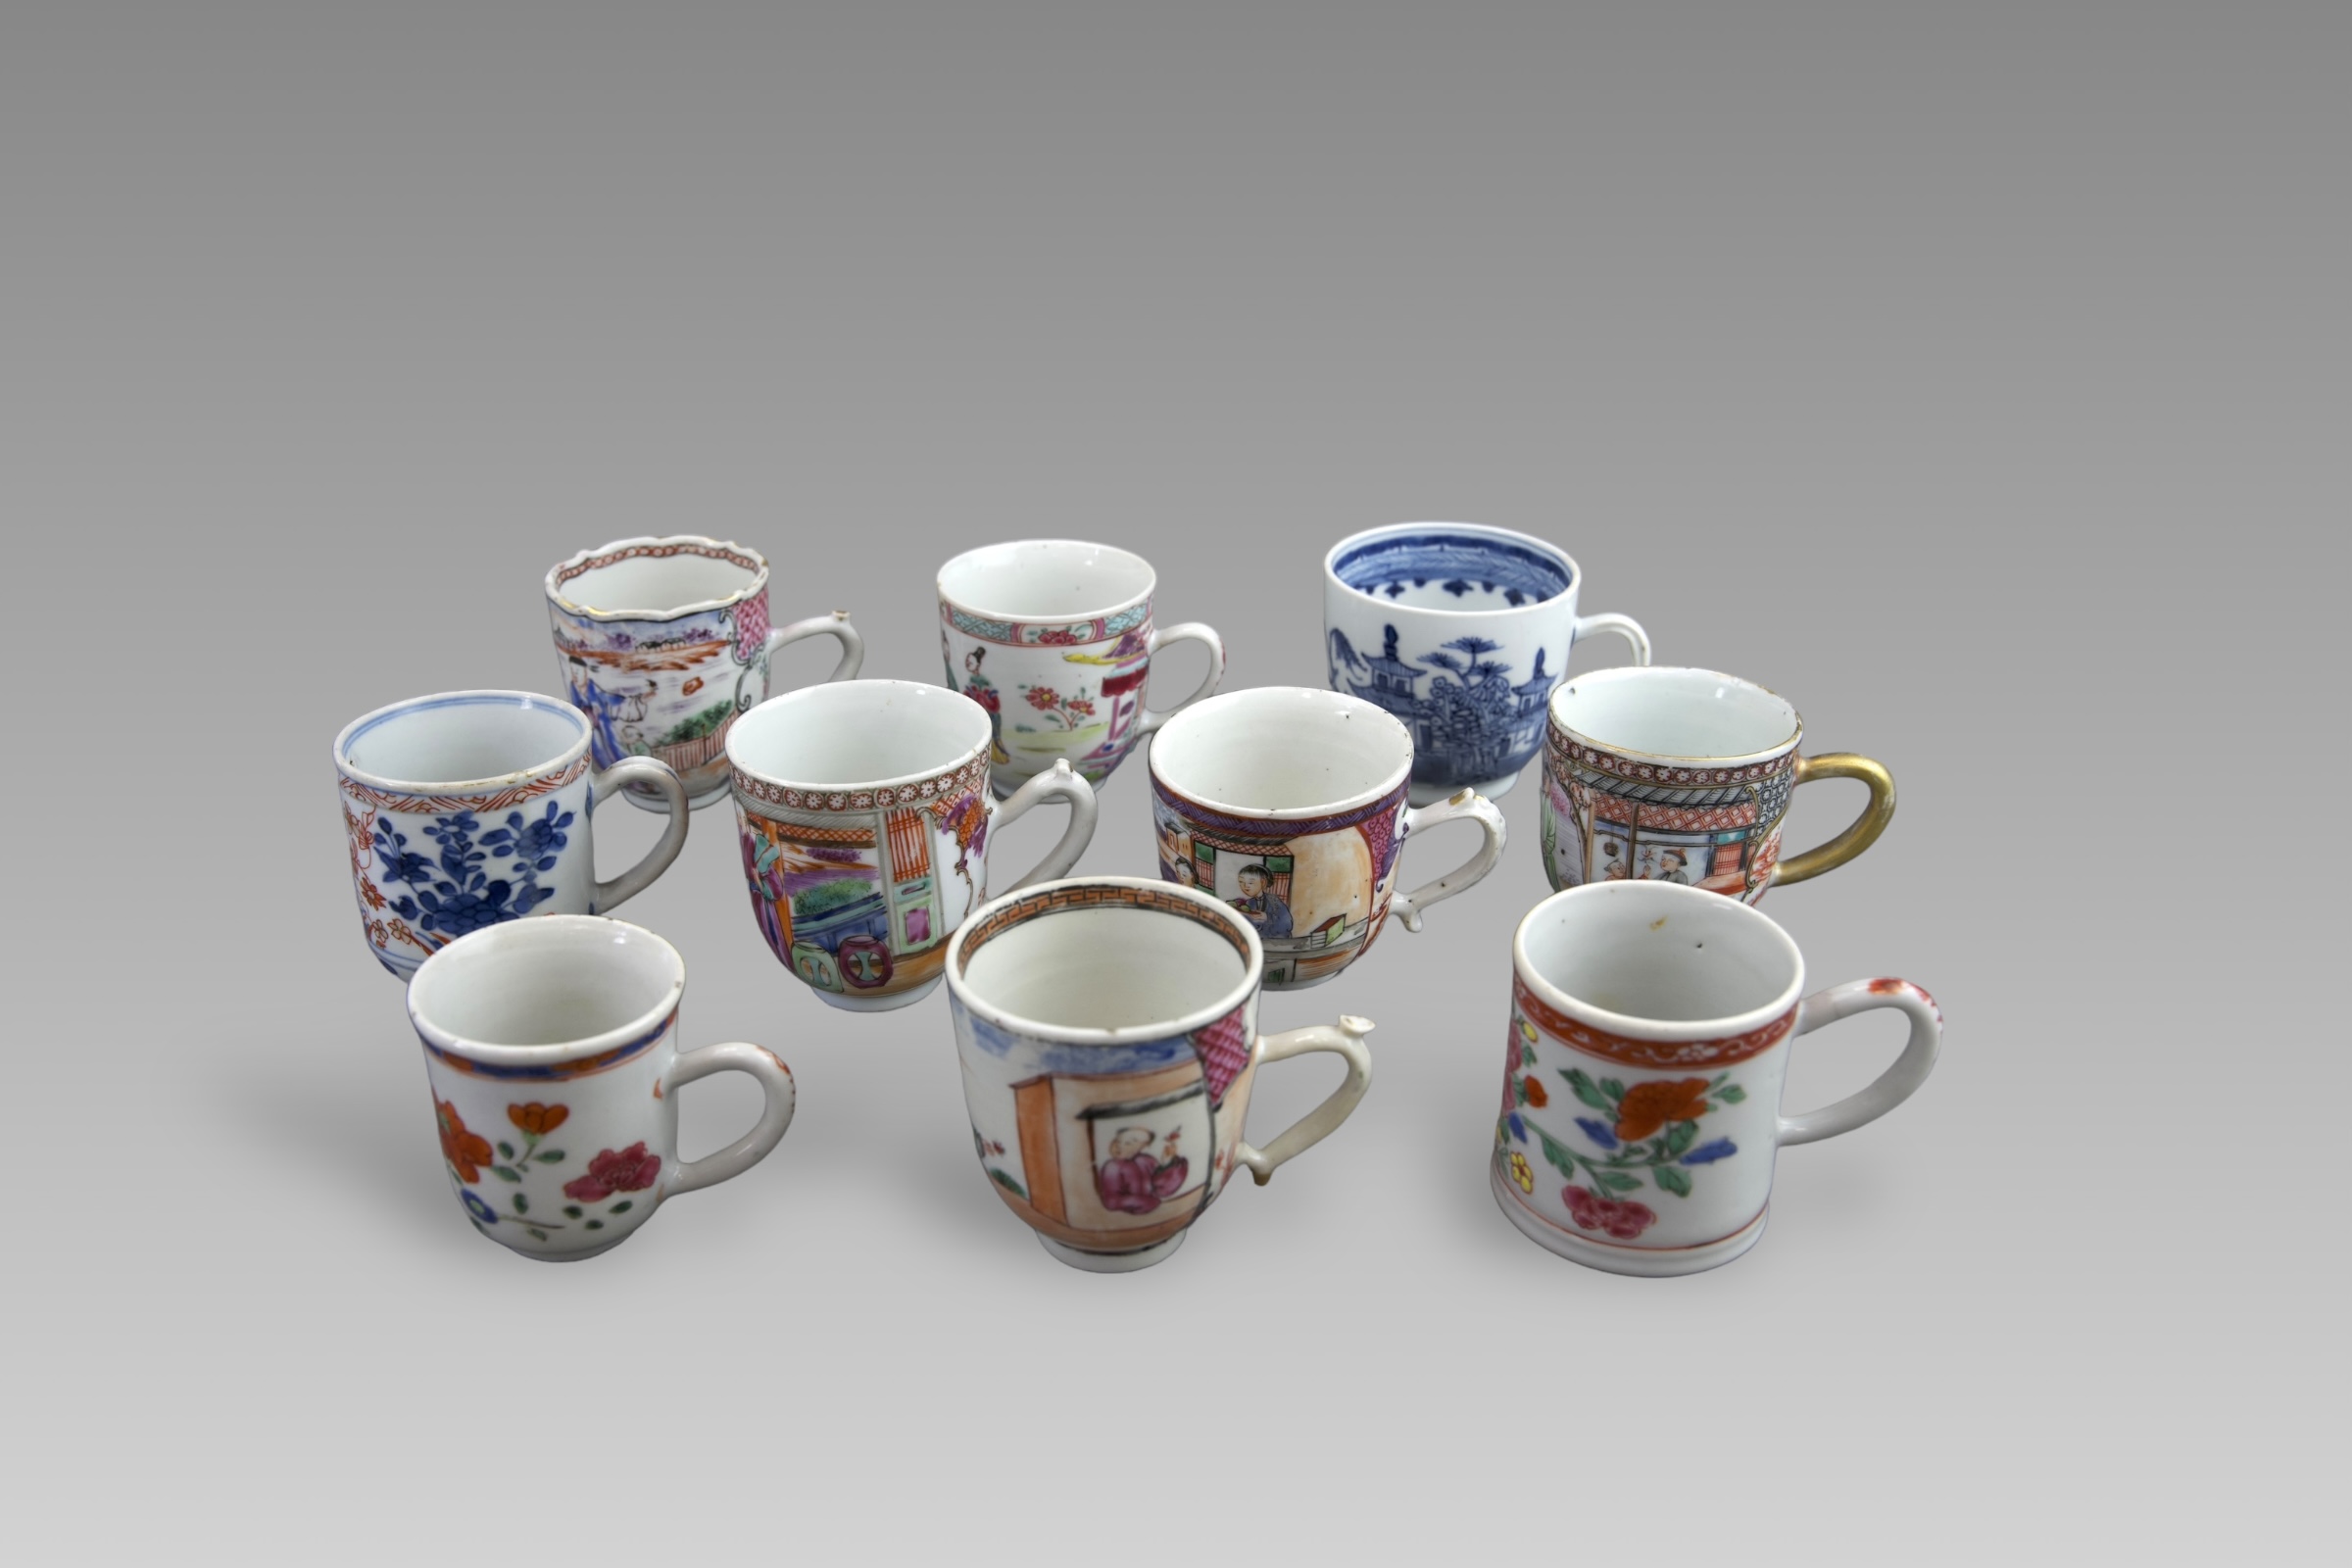 A Set of 10 Blue and White and 'famille rose' Coffee Cups, 18th century